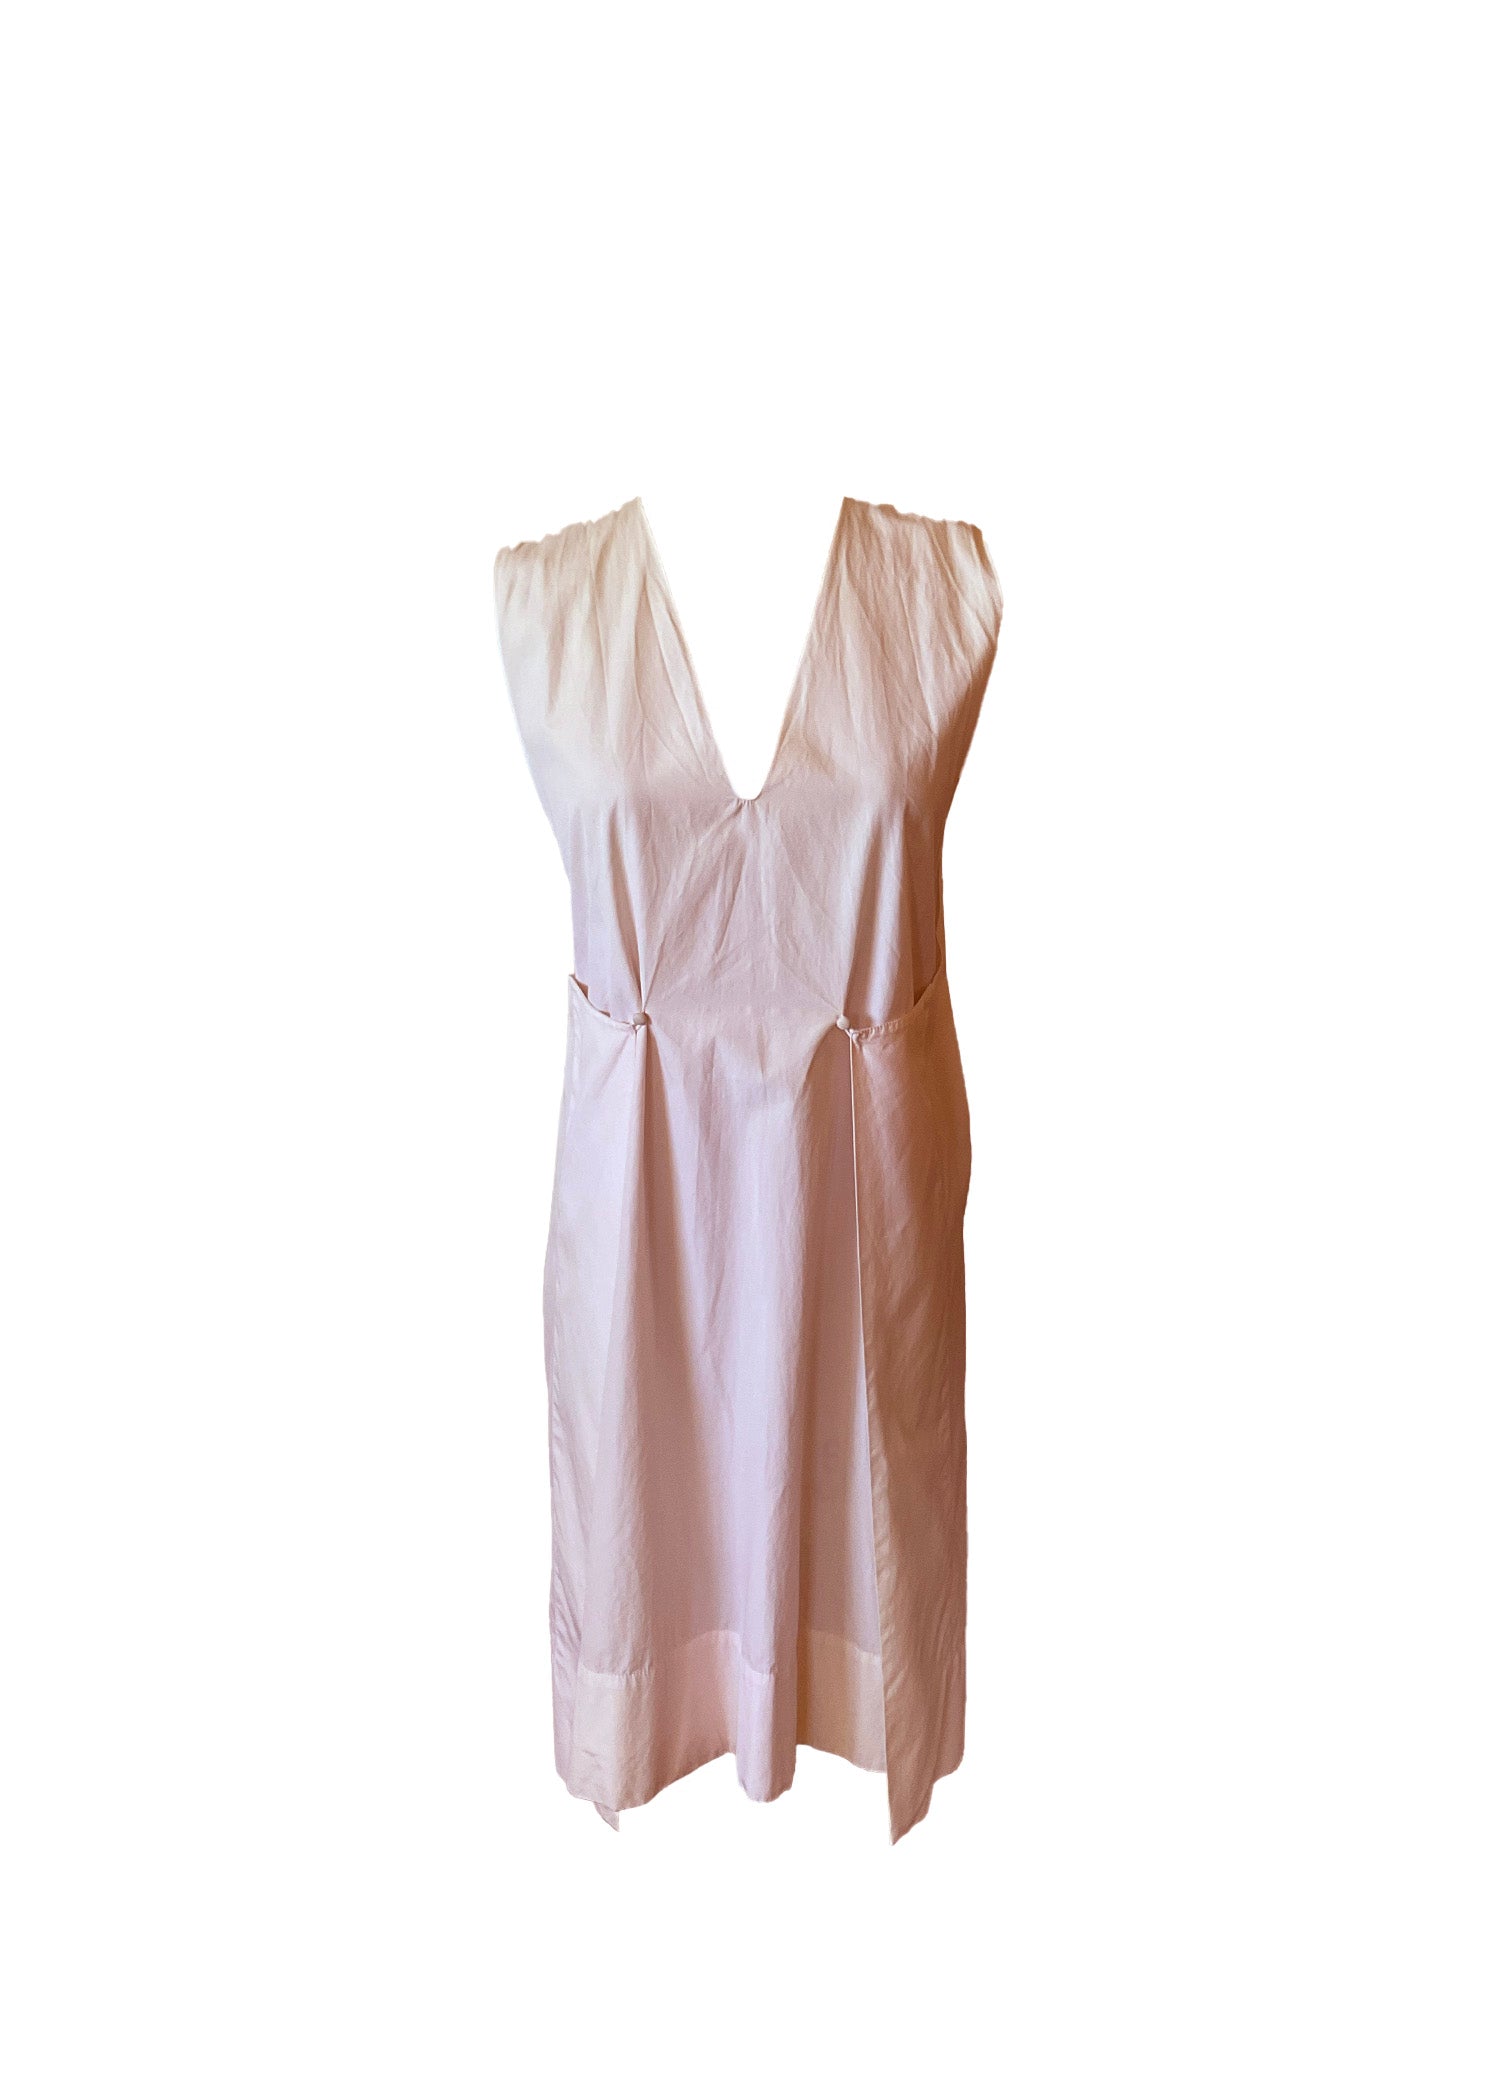 THE ENVELOPE DRESS IN COTTON